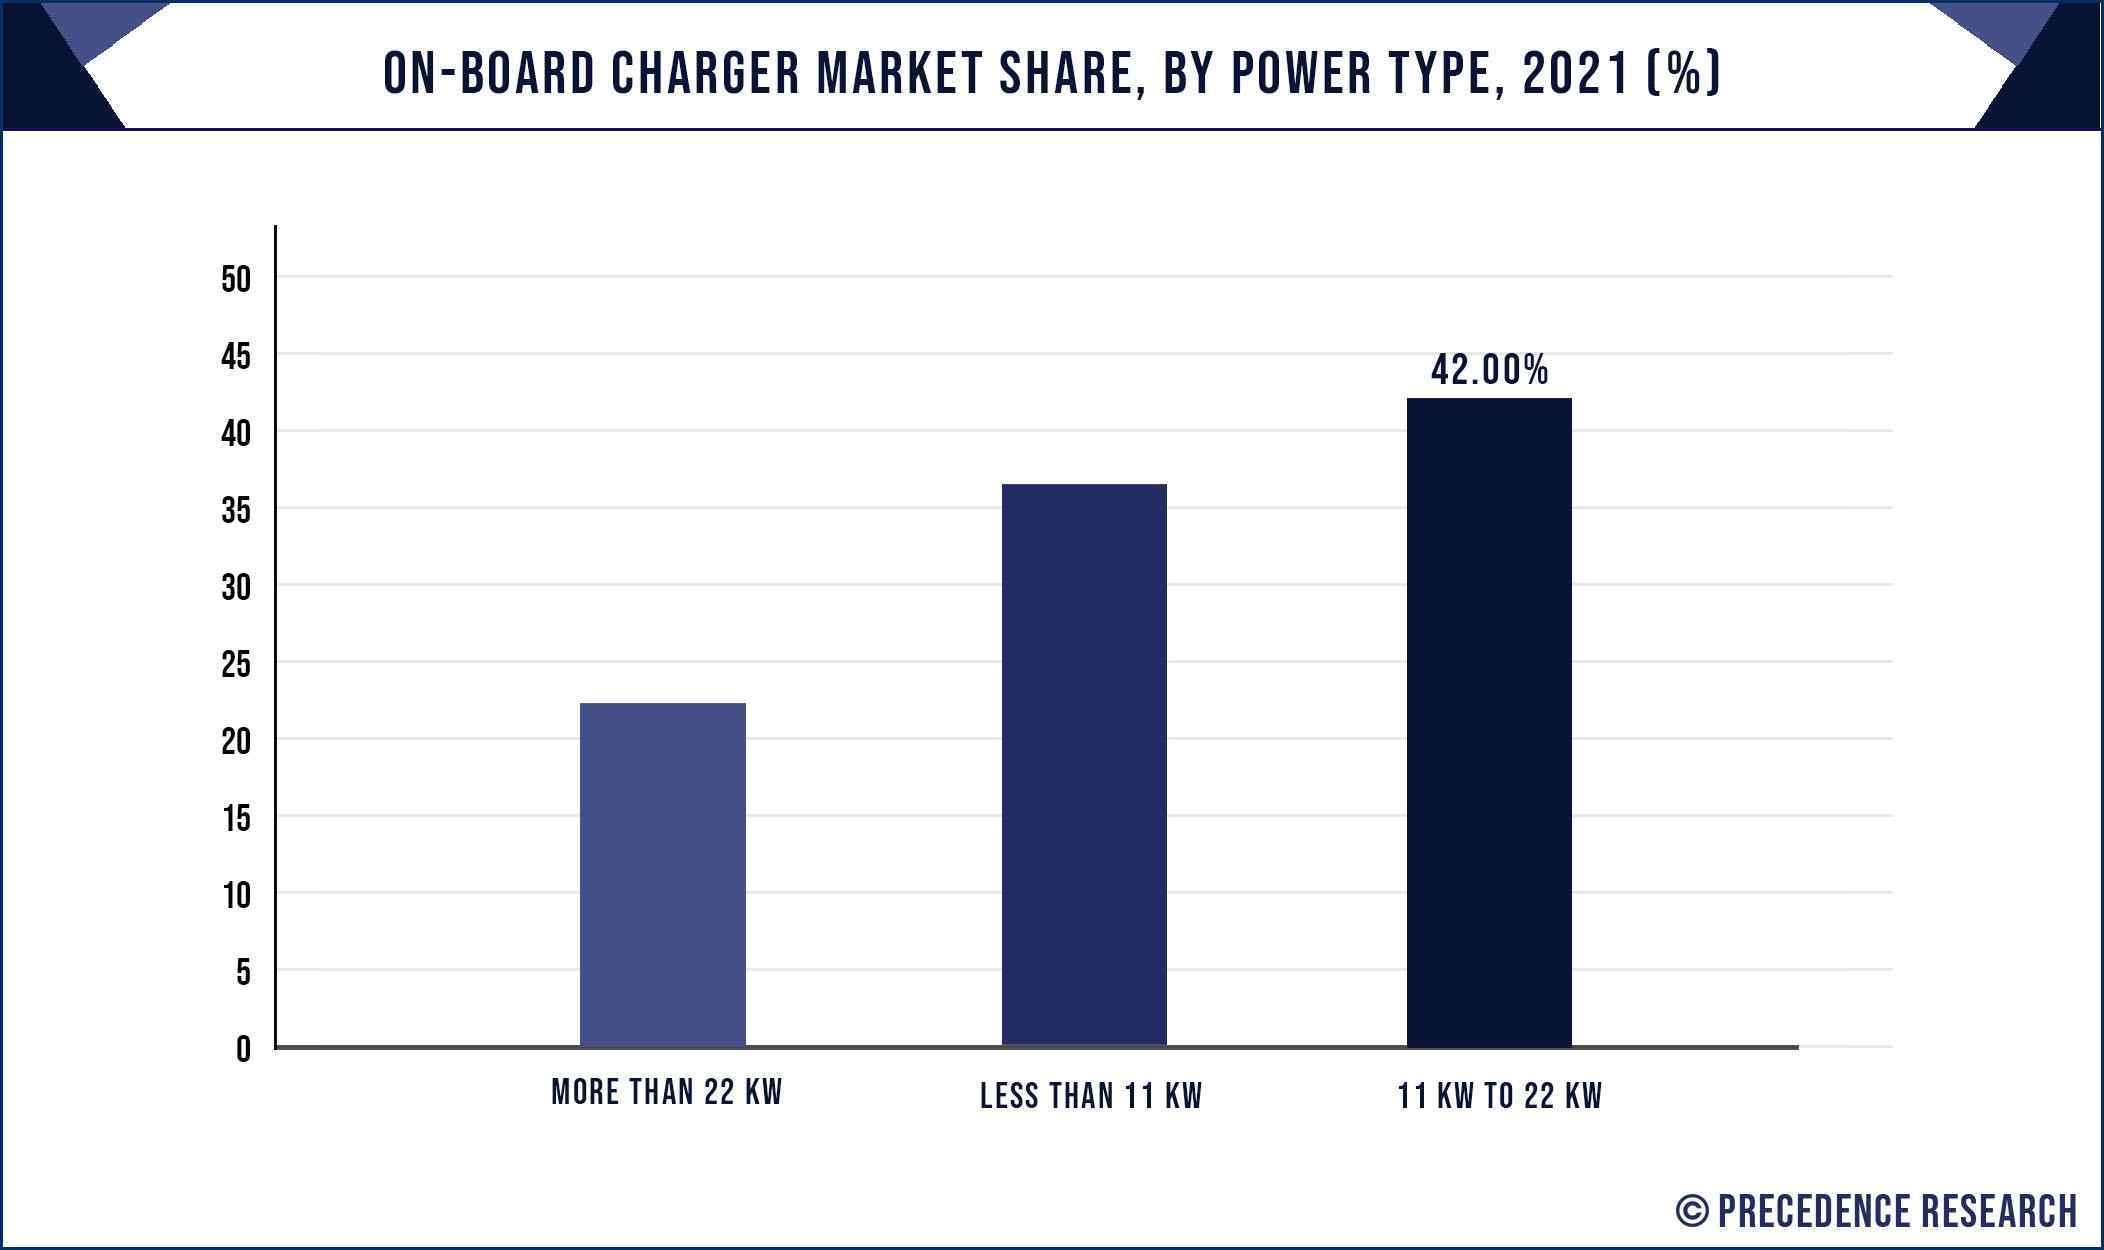 On Board Charger Market Share, By Power Type, 2021 (%)